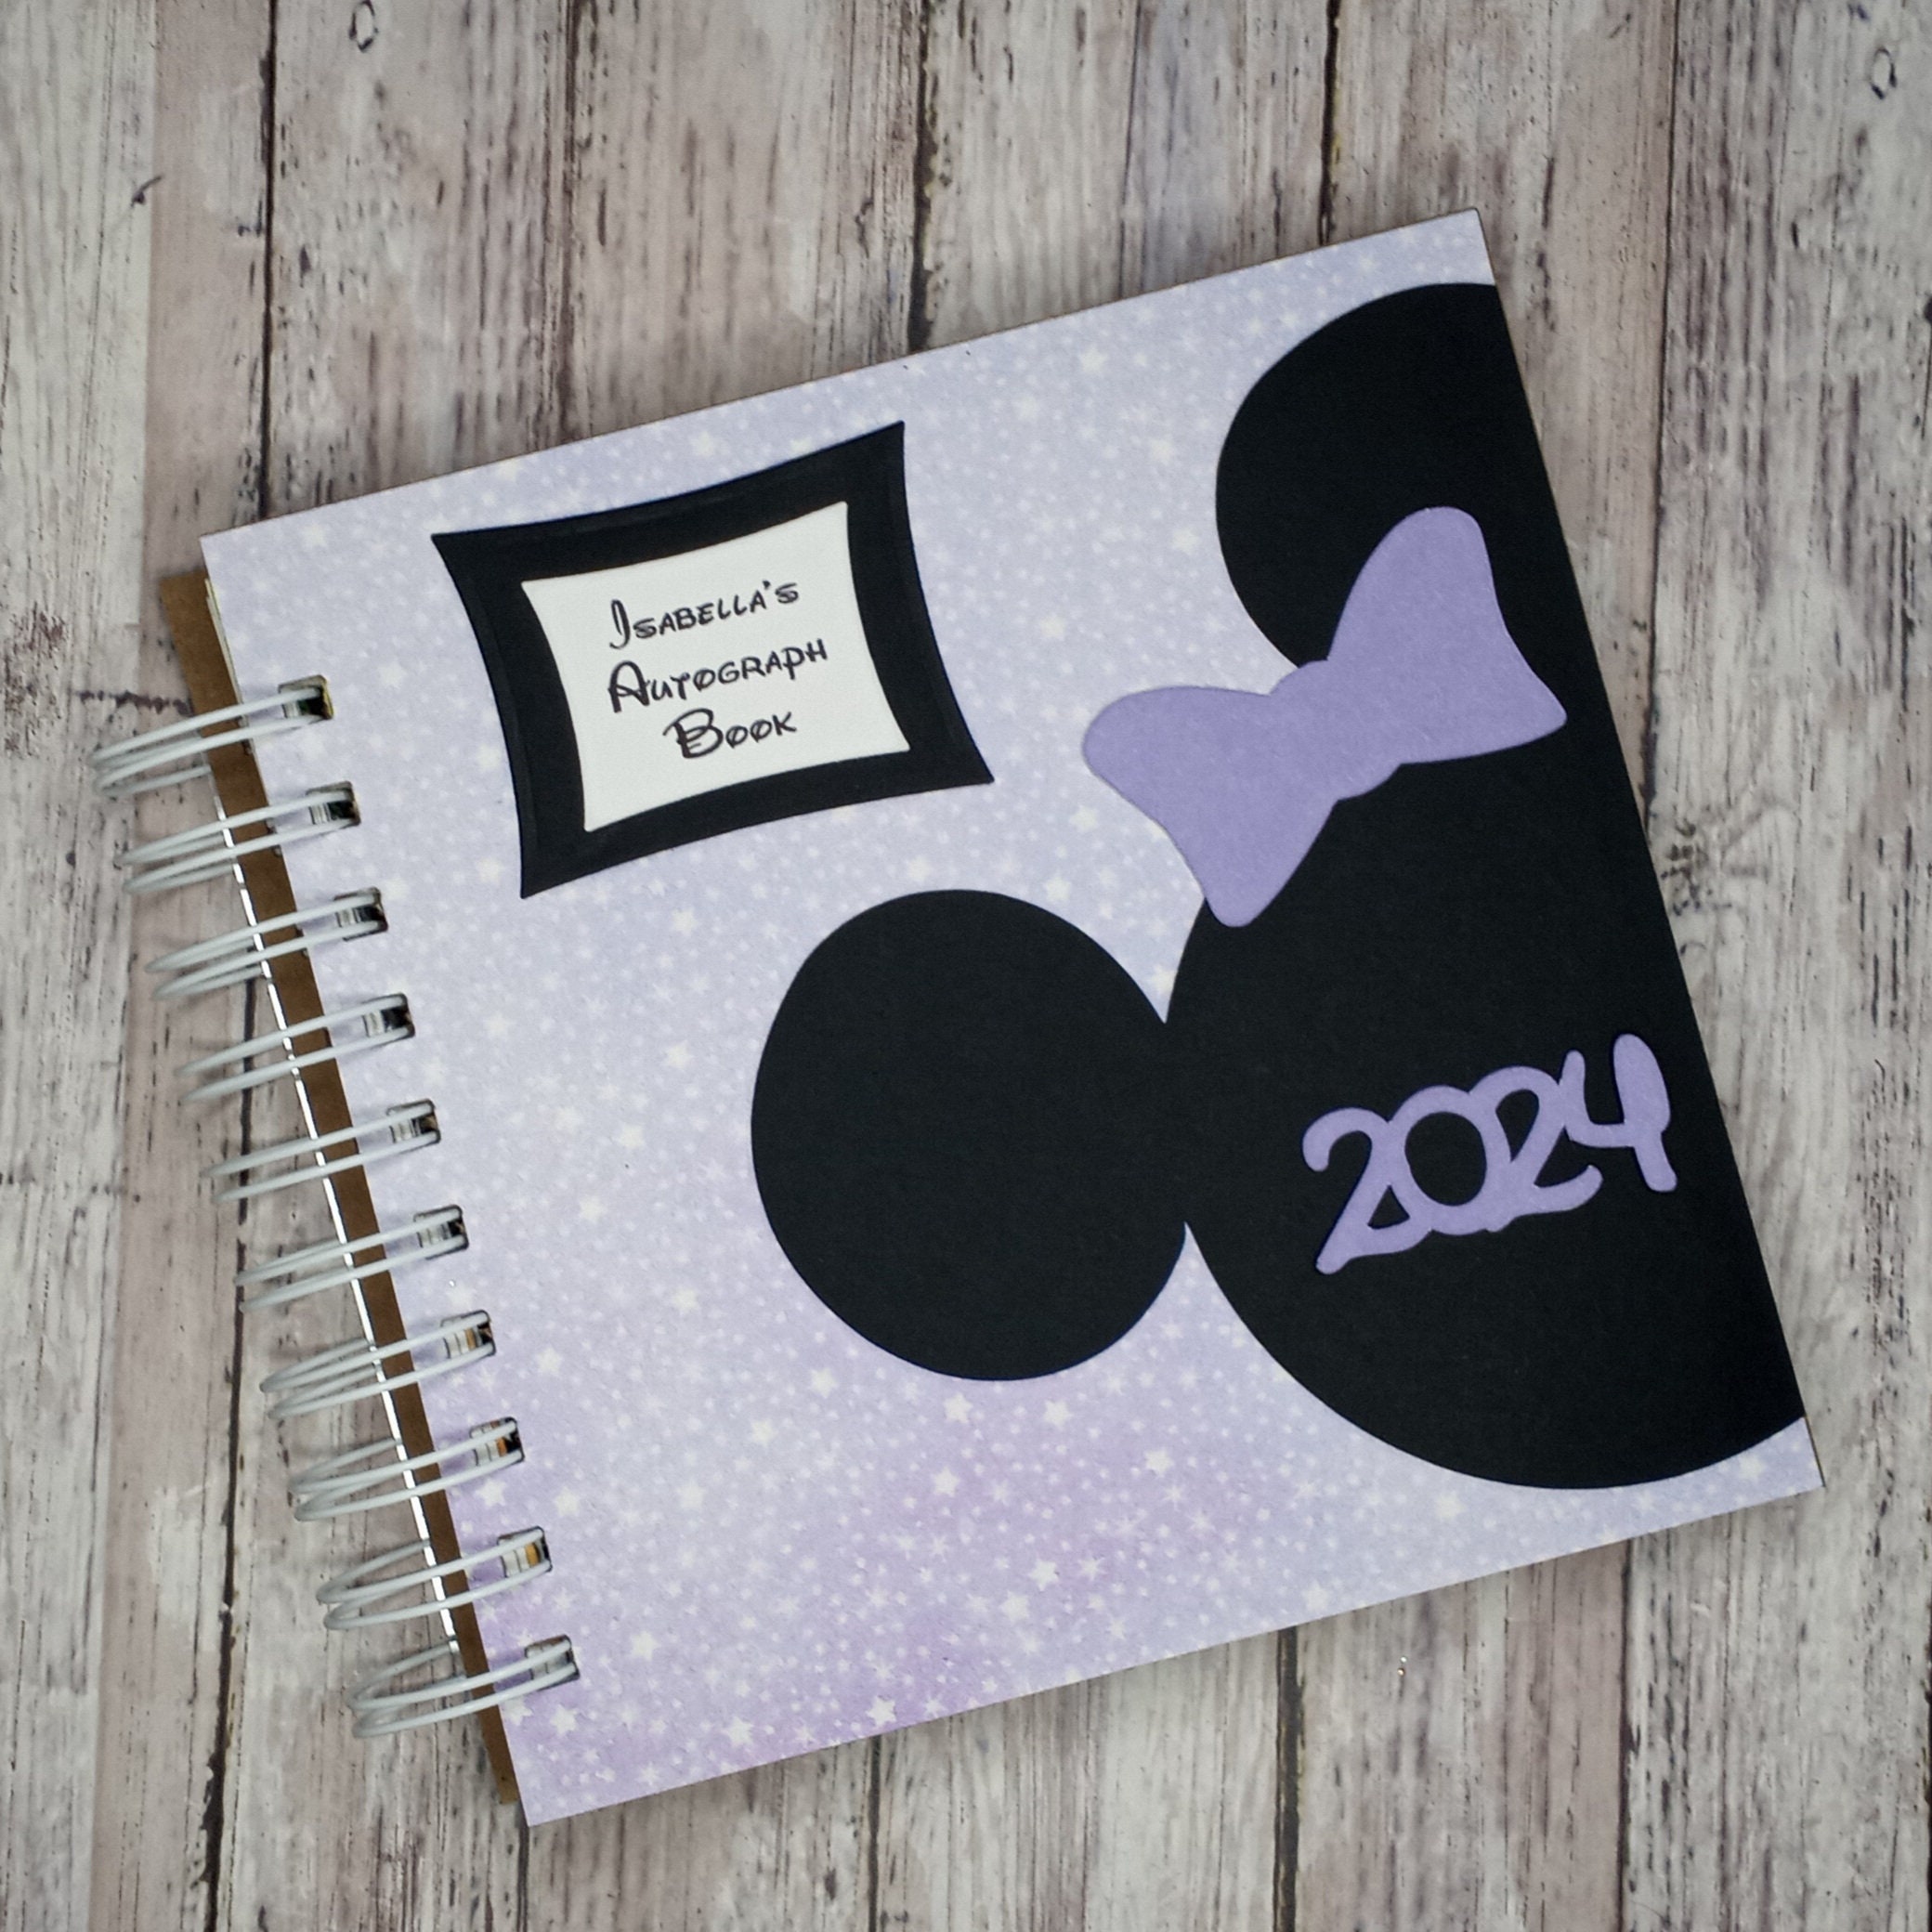 2024 Autograph Book for Girls: Autograph Pad for Signatures and/or Photos  of Characters at Amusement Parks, Vacation Resorts, and Cruises. For Kids  of All Ages. Pink and Purple Castle Cover.: Craft, JRG